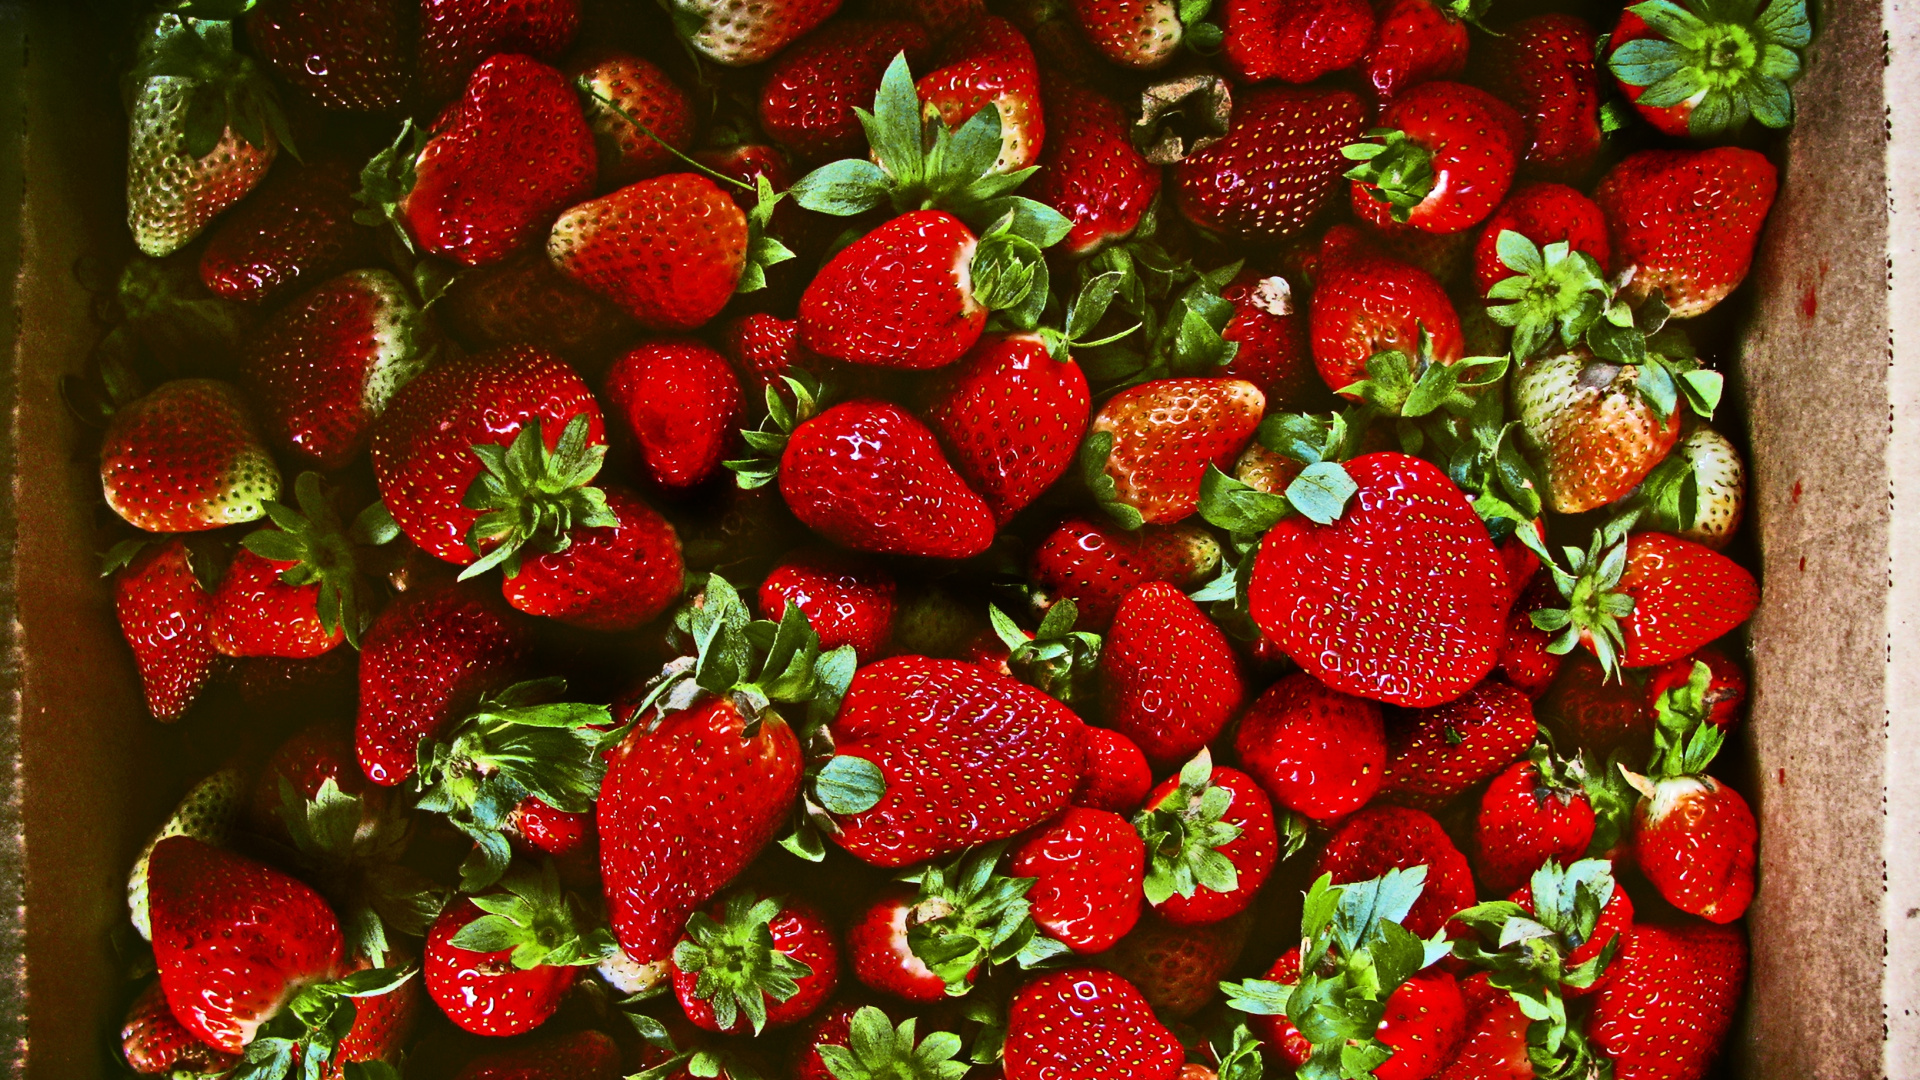 Strawberries in Brown Wooden Container. Wallpaper in 1920x1080 Resolution